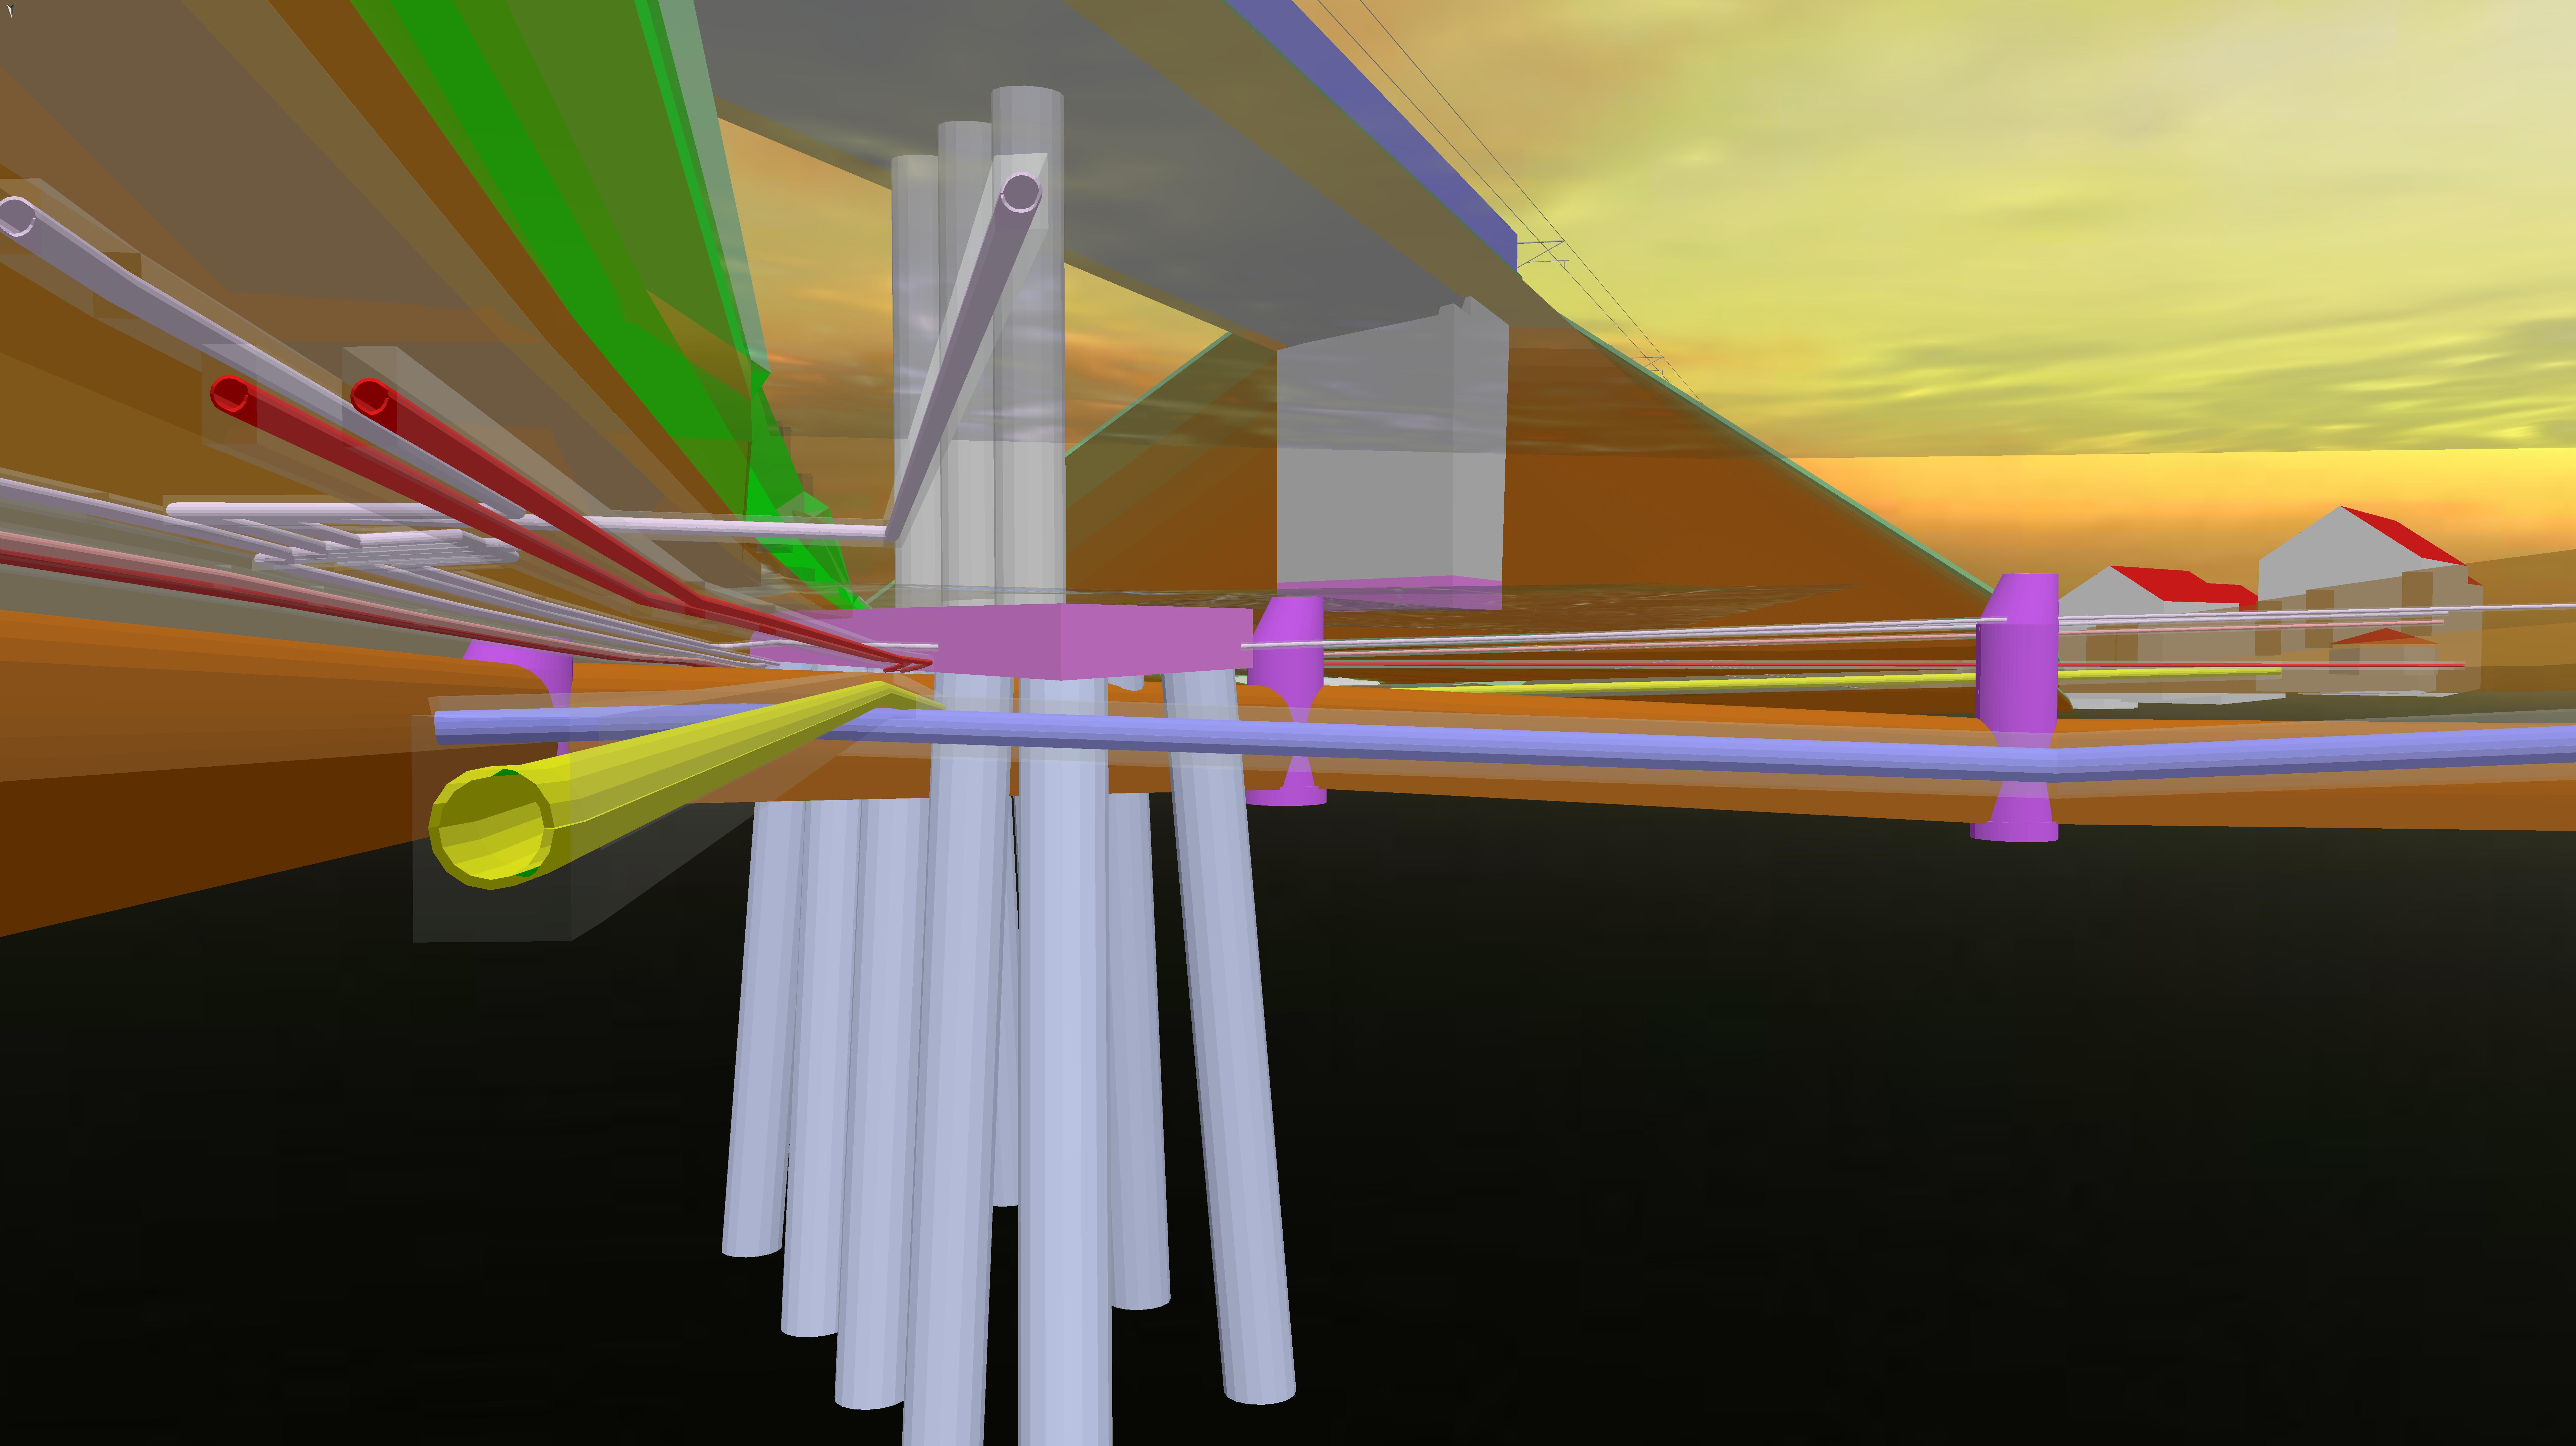 Image 2: 3D conduits with areas of uncertainty as transparent structures to detect conflicts.